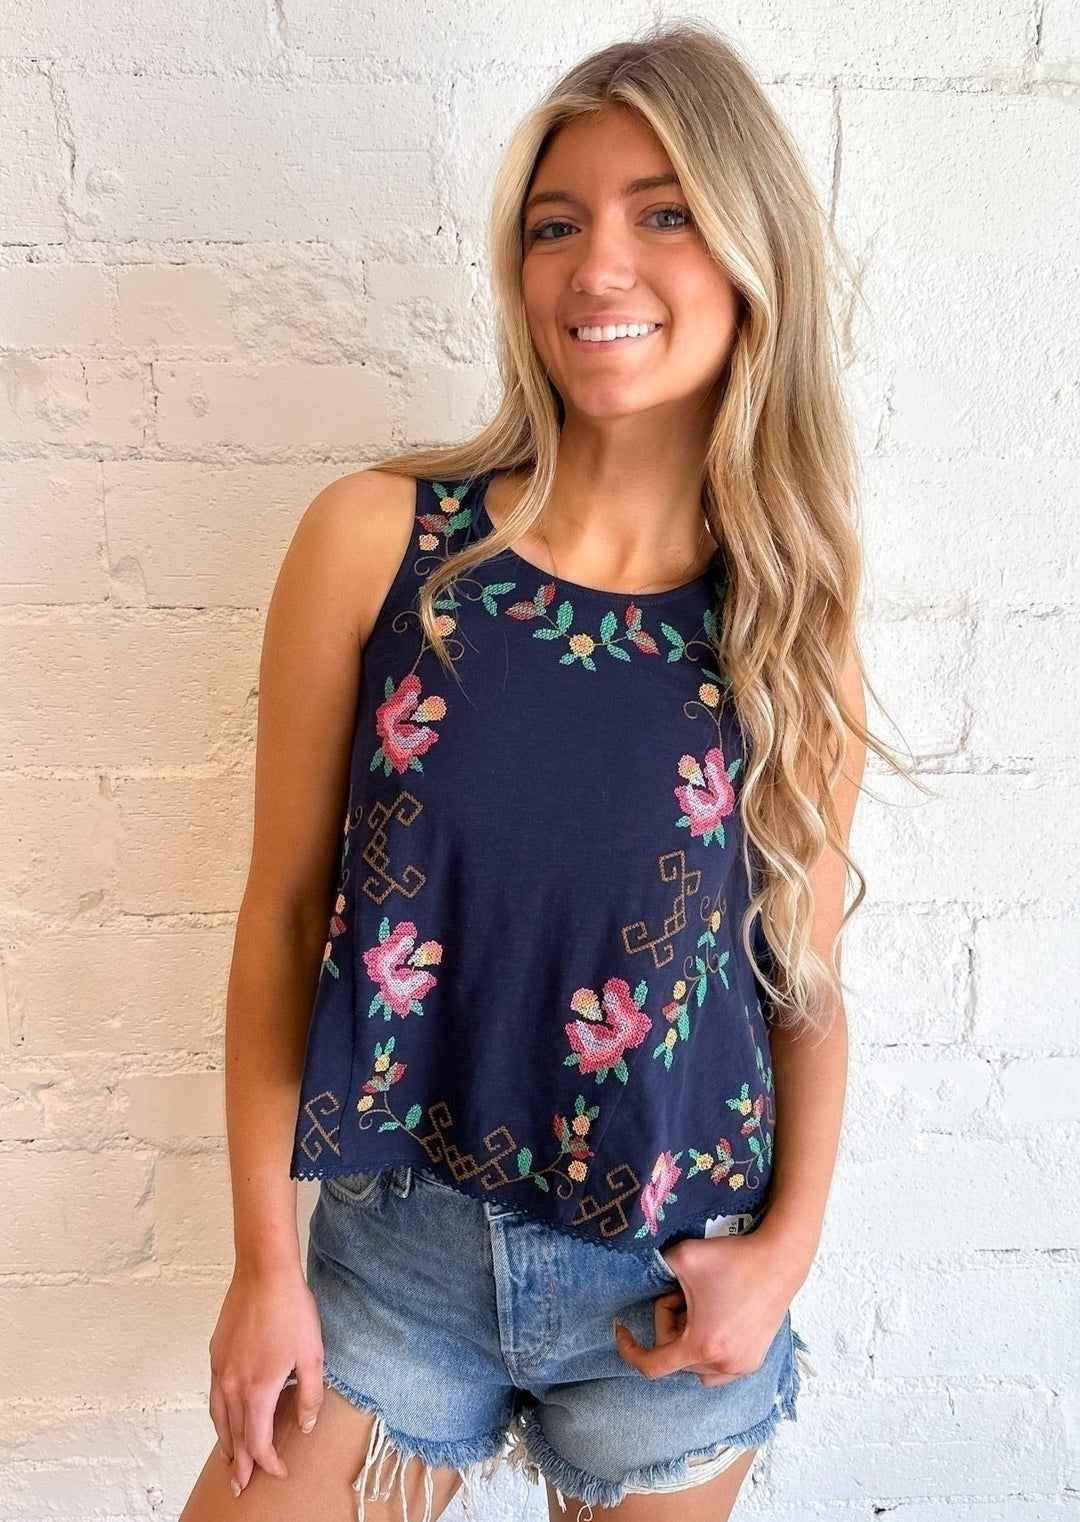 Free People Fun & Flirty Embroidered Top, Tops, Free People, Adeline, dallas boutique, dallas texas, texas boutique, women's boutique dallas, adeline boutique, dallas boutique, trendy boutique, affordable boutique